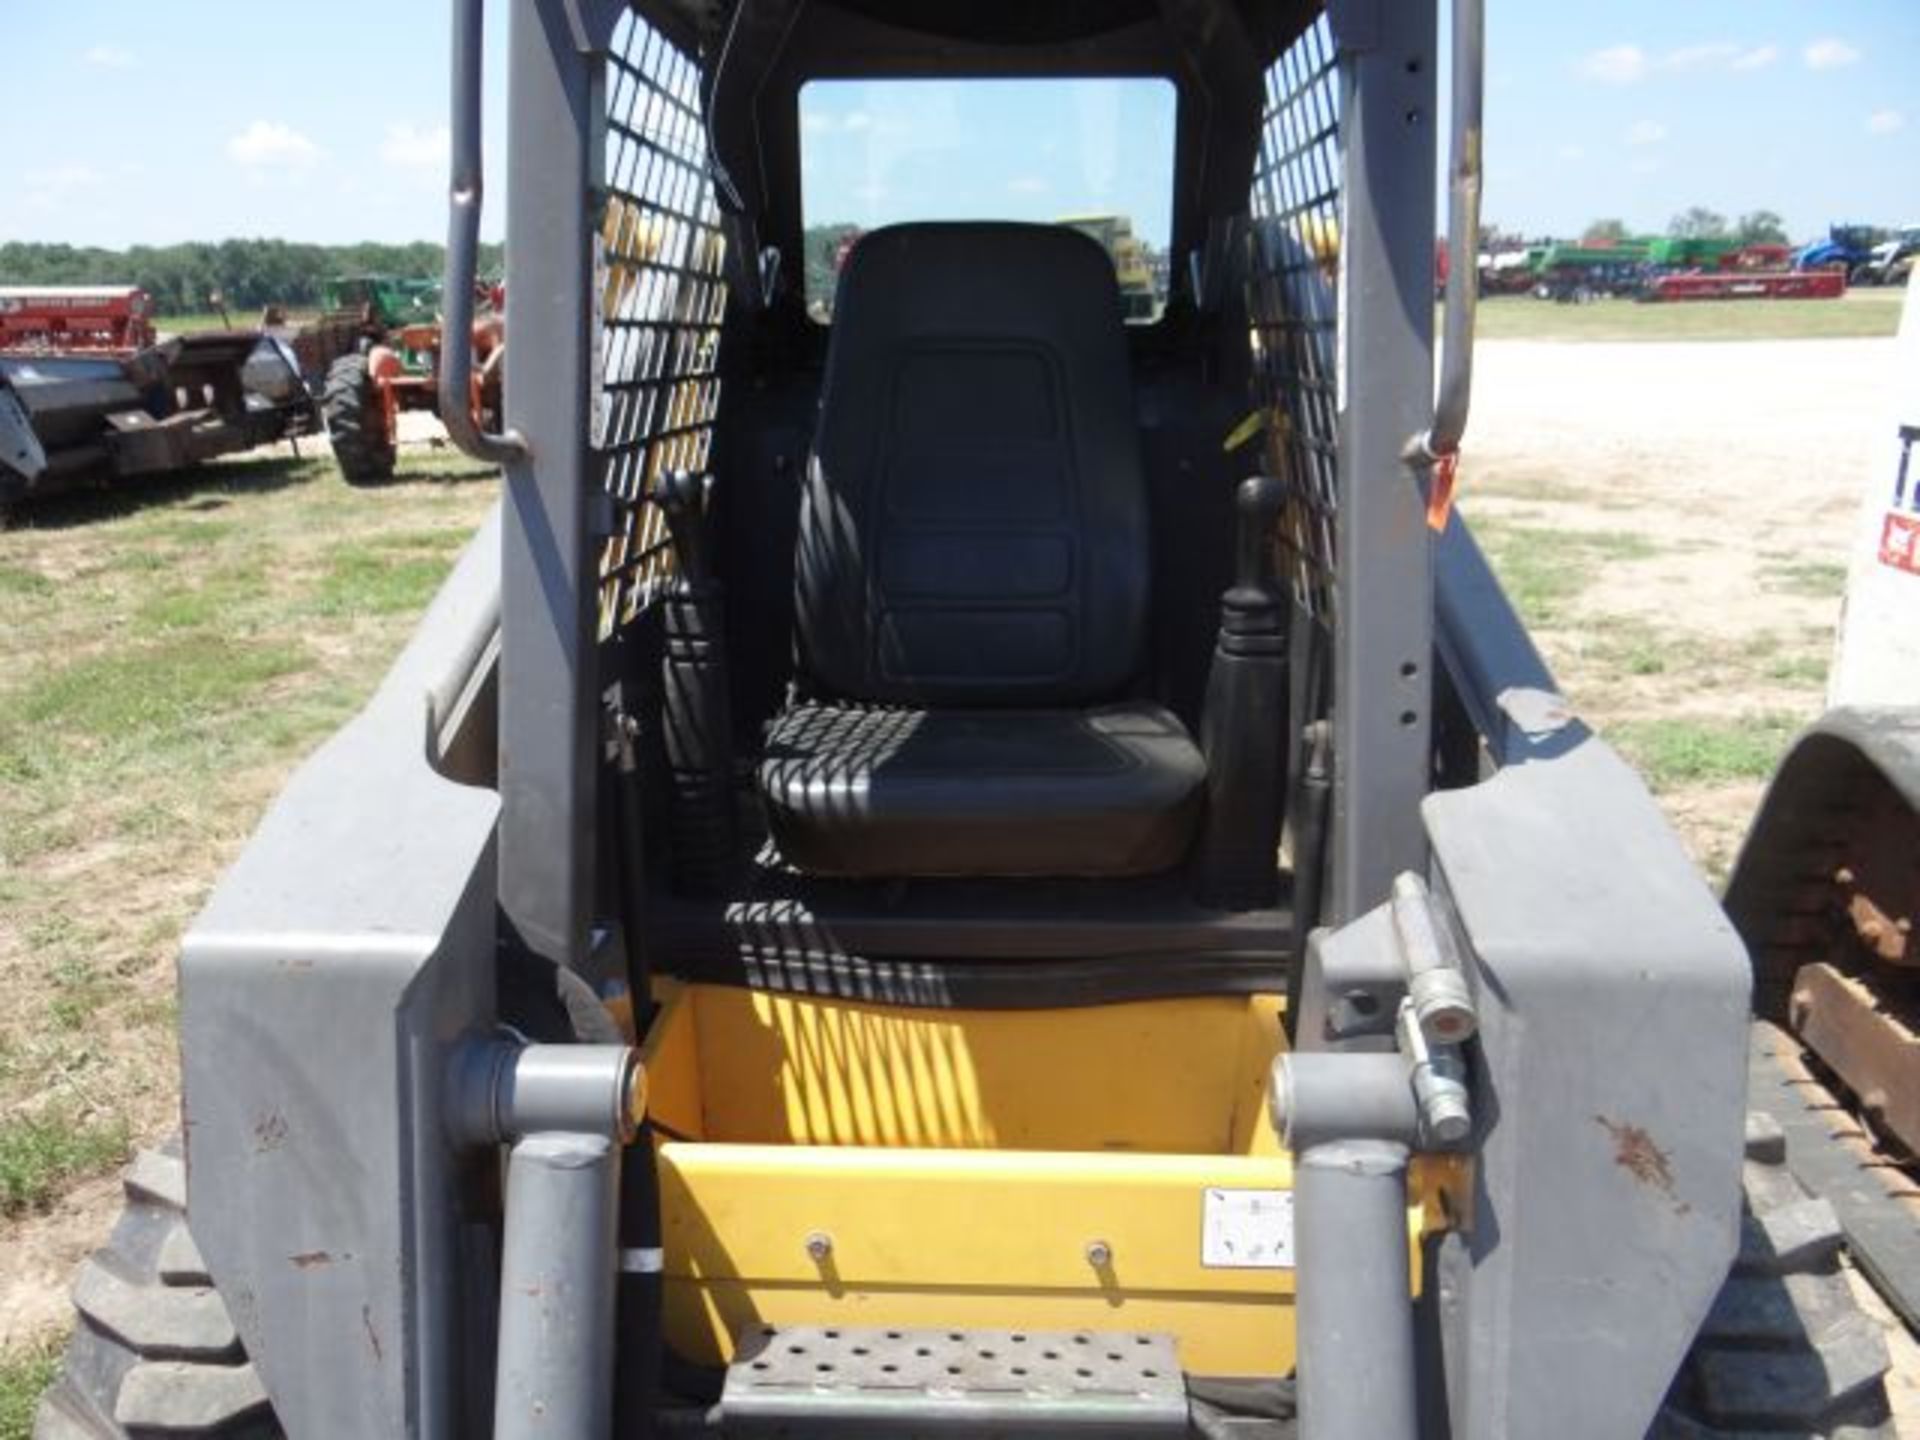 Volvo MC70B Skid Steer, 2006 #111615, 1890 hrs, 53hp, Less than 40 hrs on Tires, 72" Construction - Image 4 of 4